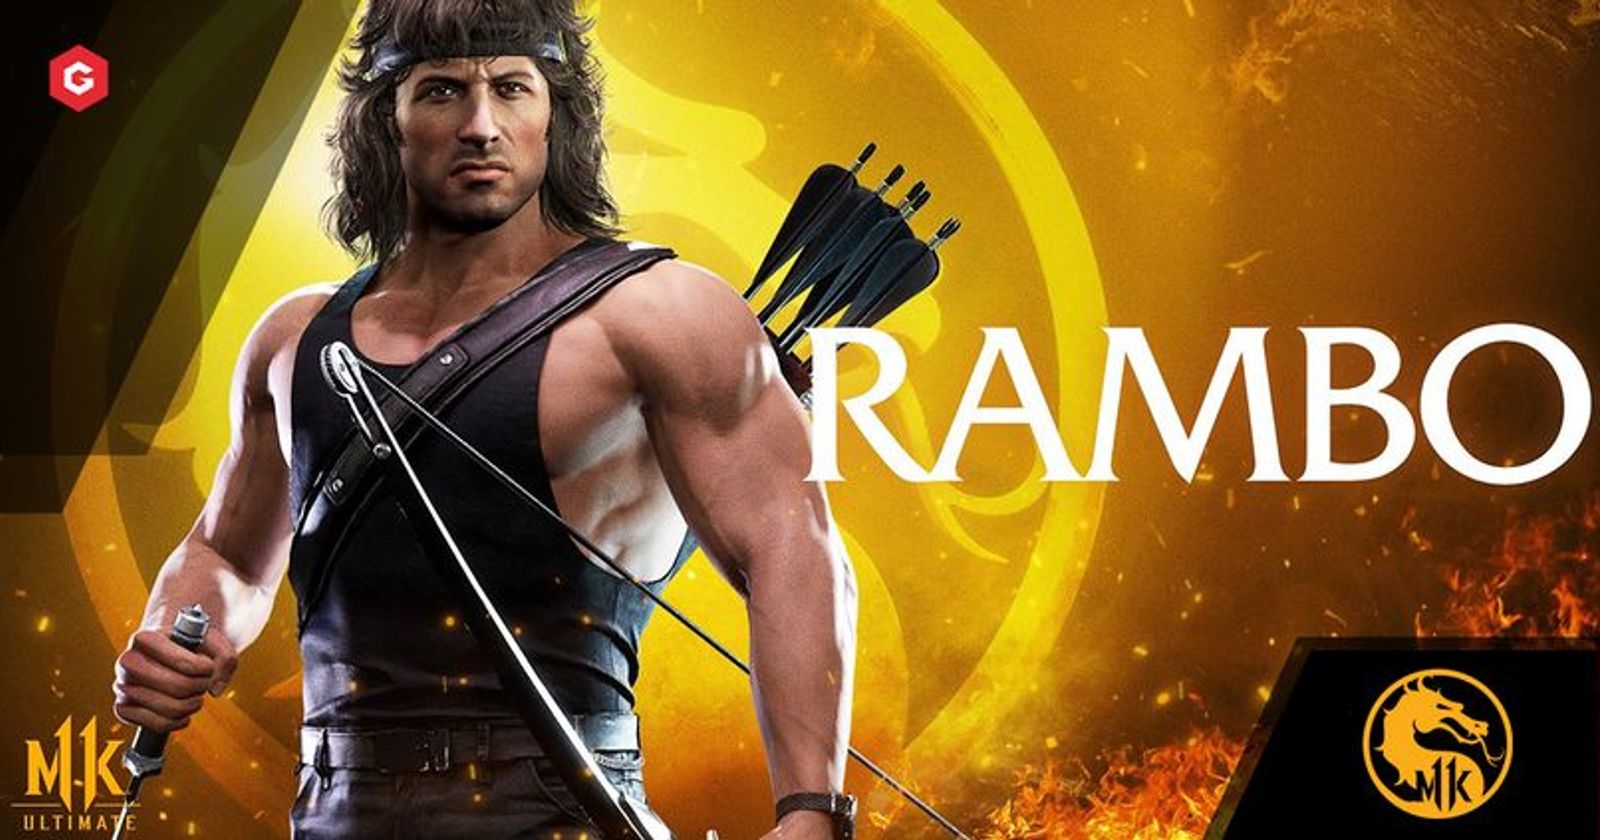 How does Rambo's Mortal Kombat 11 Fatality rank against some of